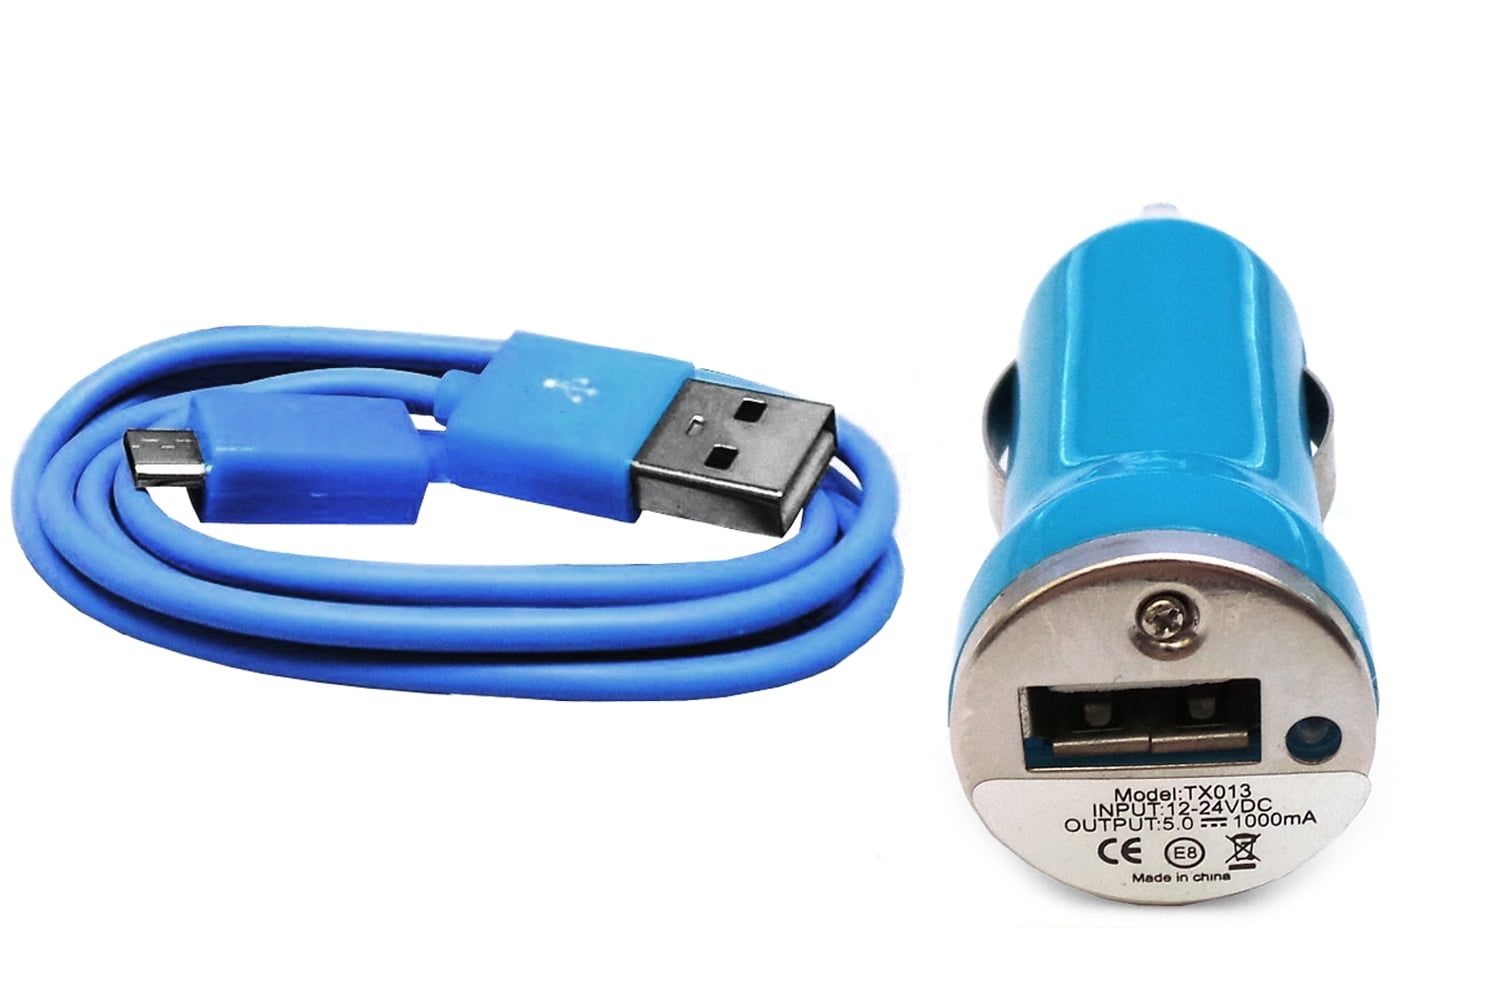 USB Charging Cable for Motorola Droid 2 A955 